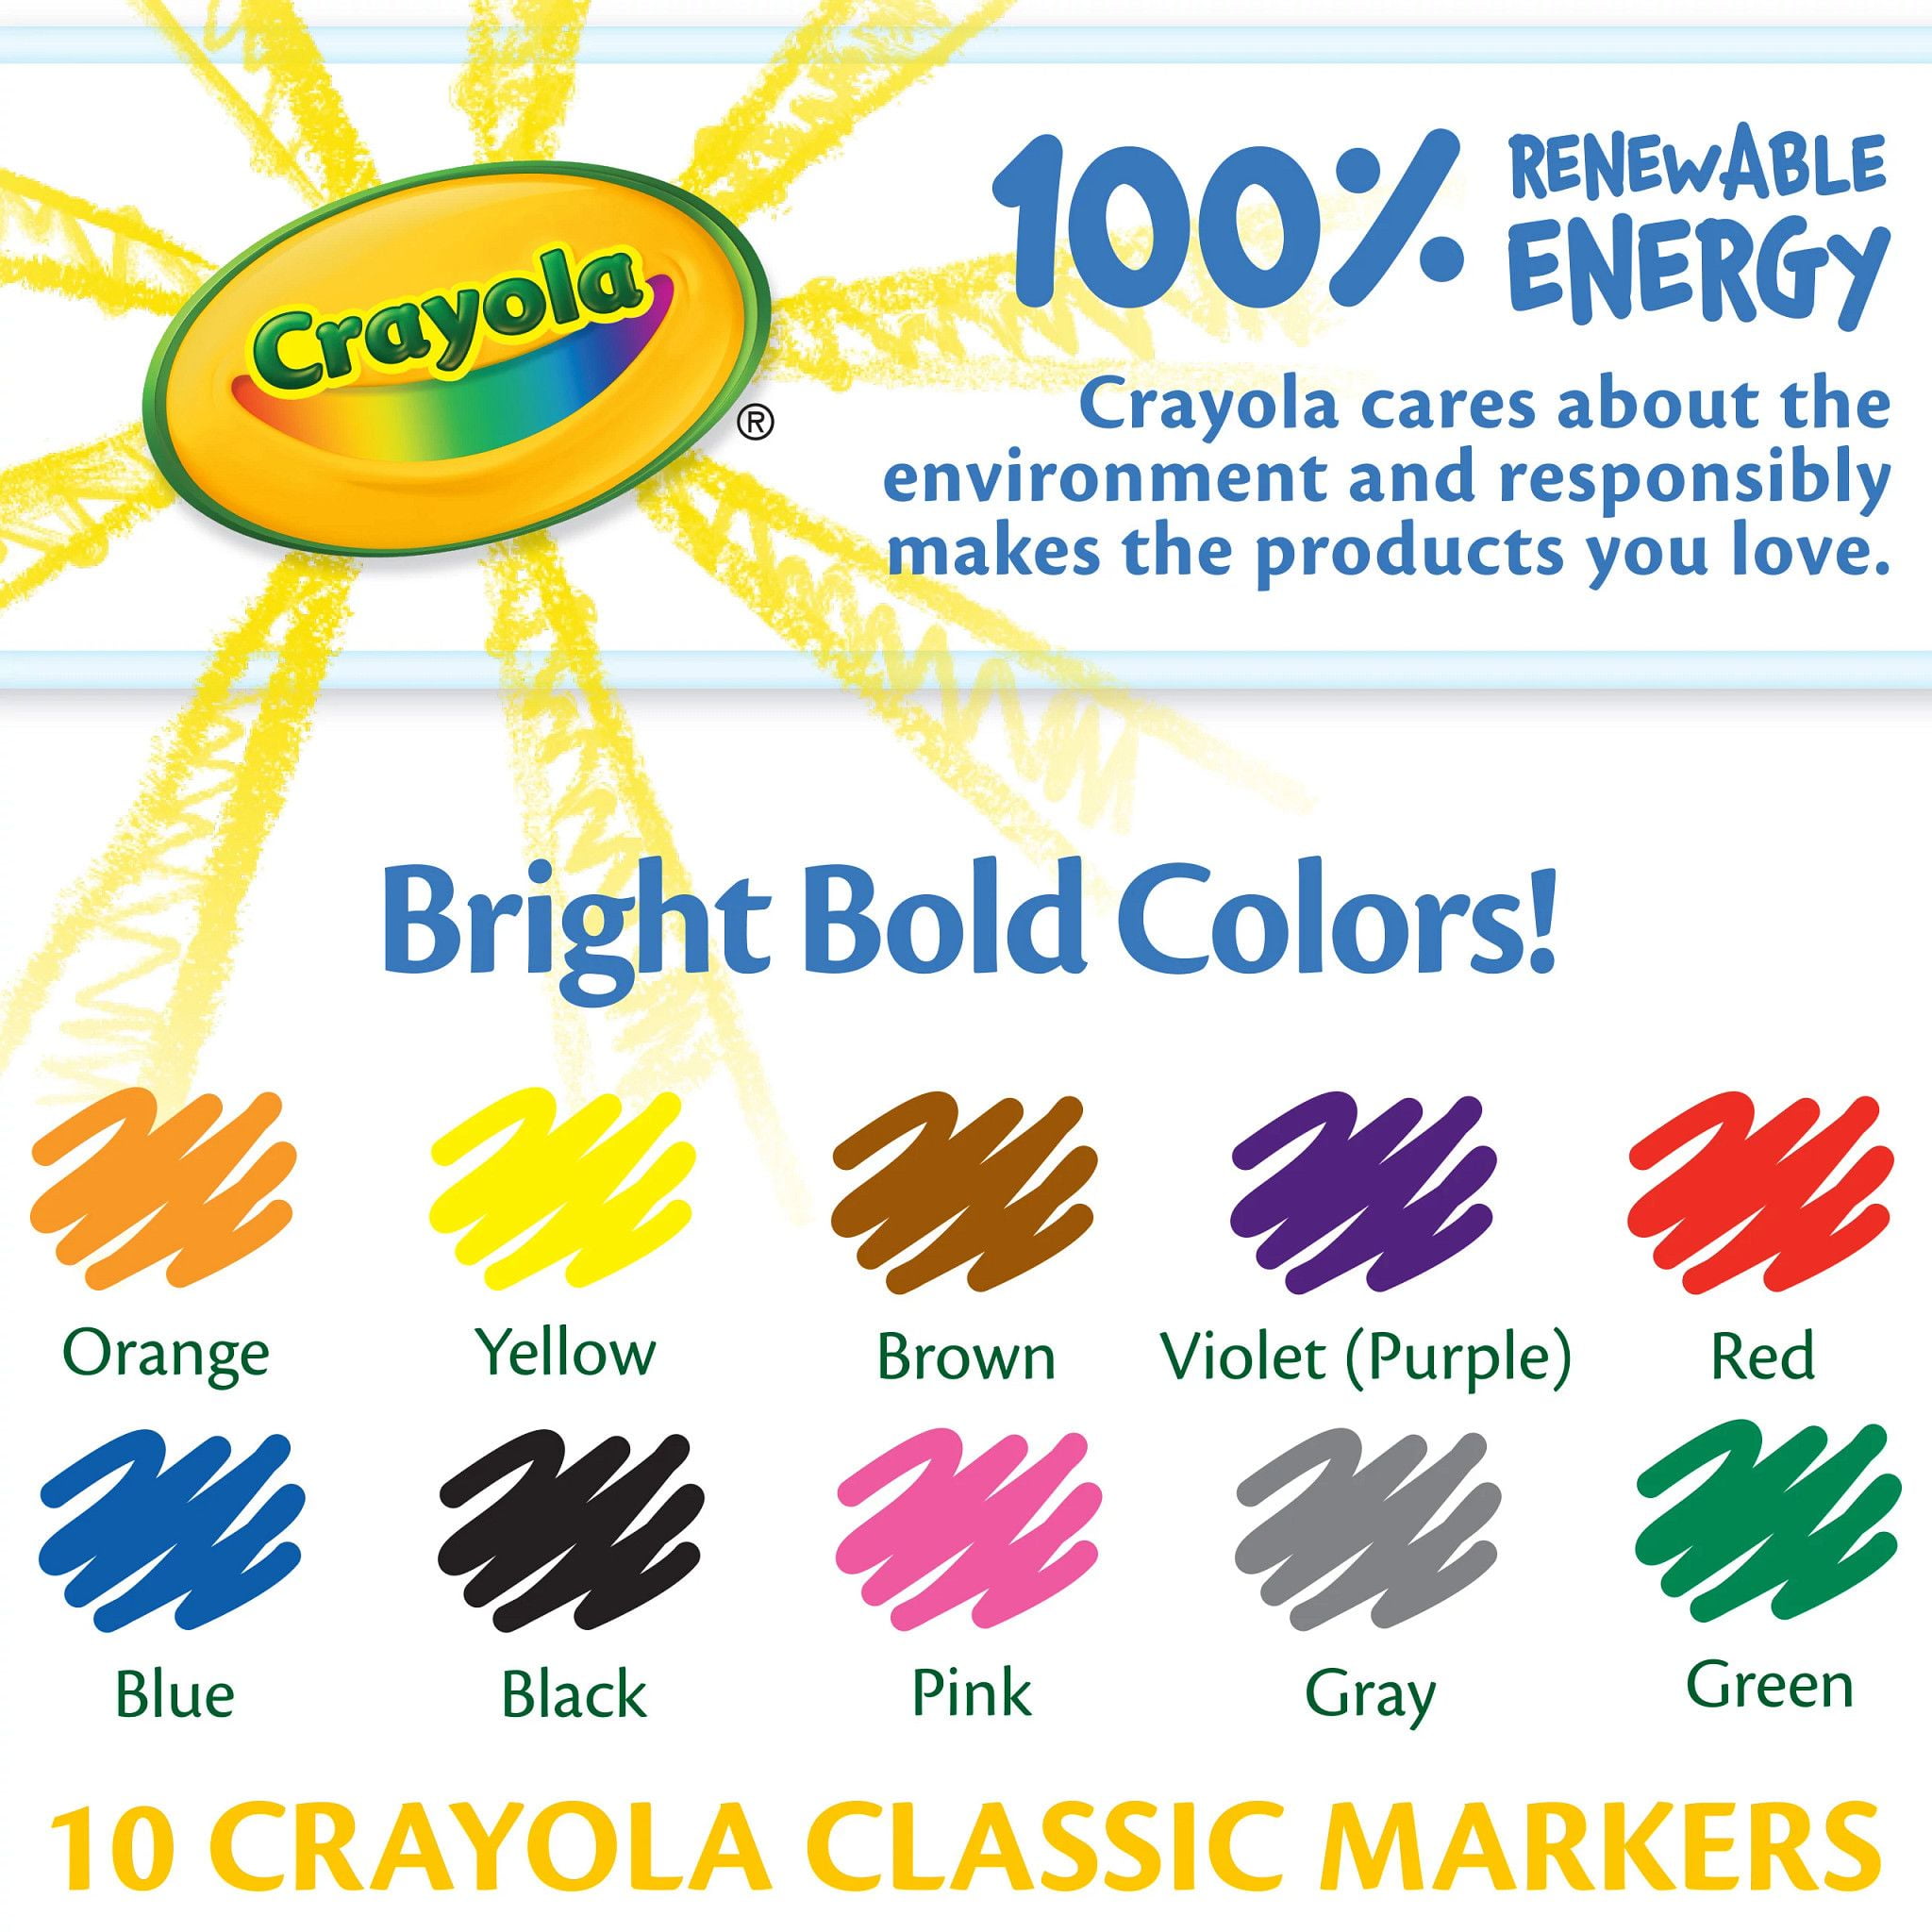 Crayola® Broad Line Washable Markers Classpack - 200 count, 8 colors